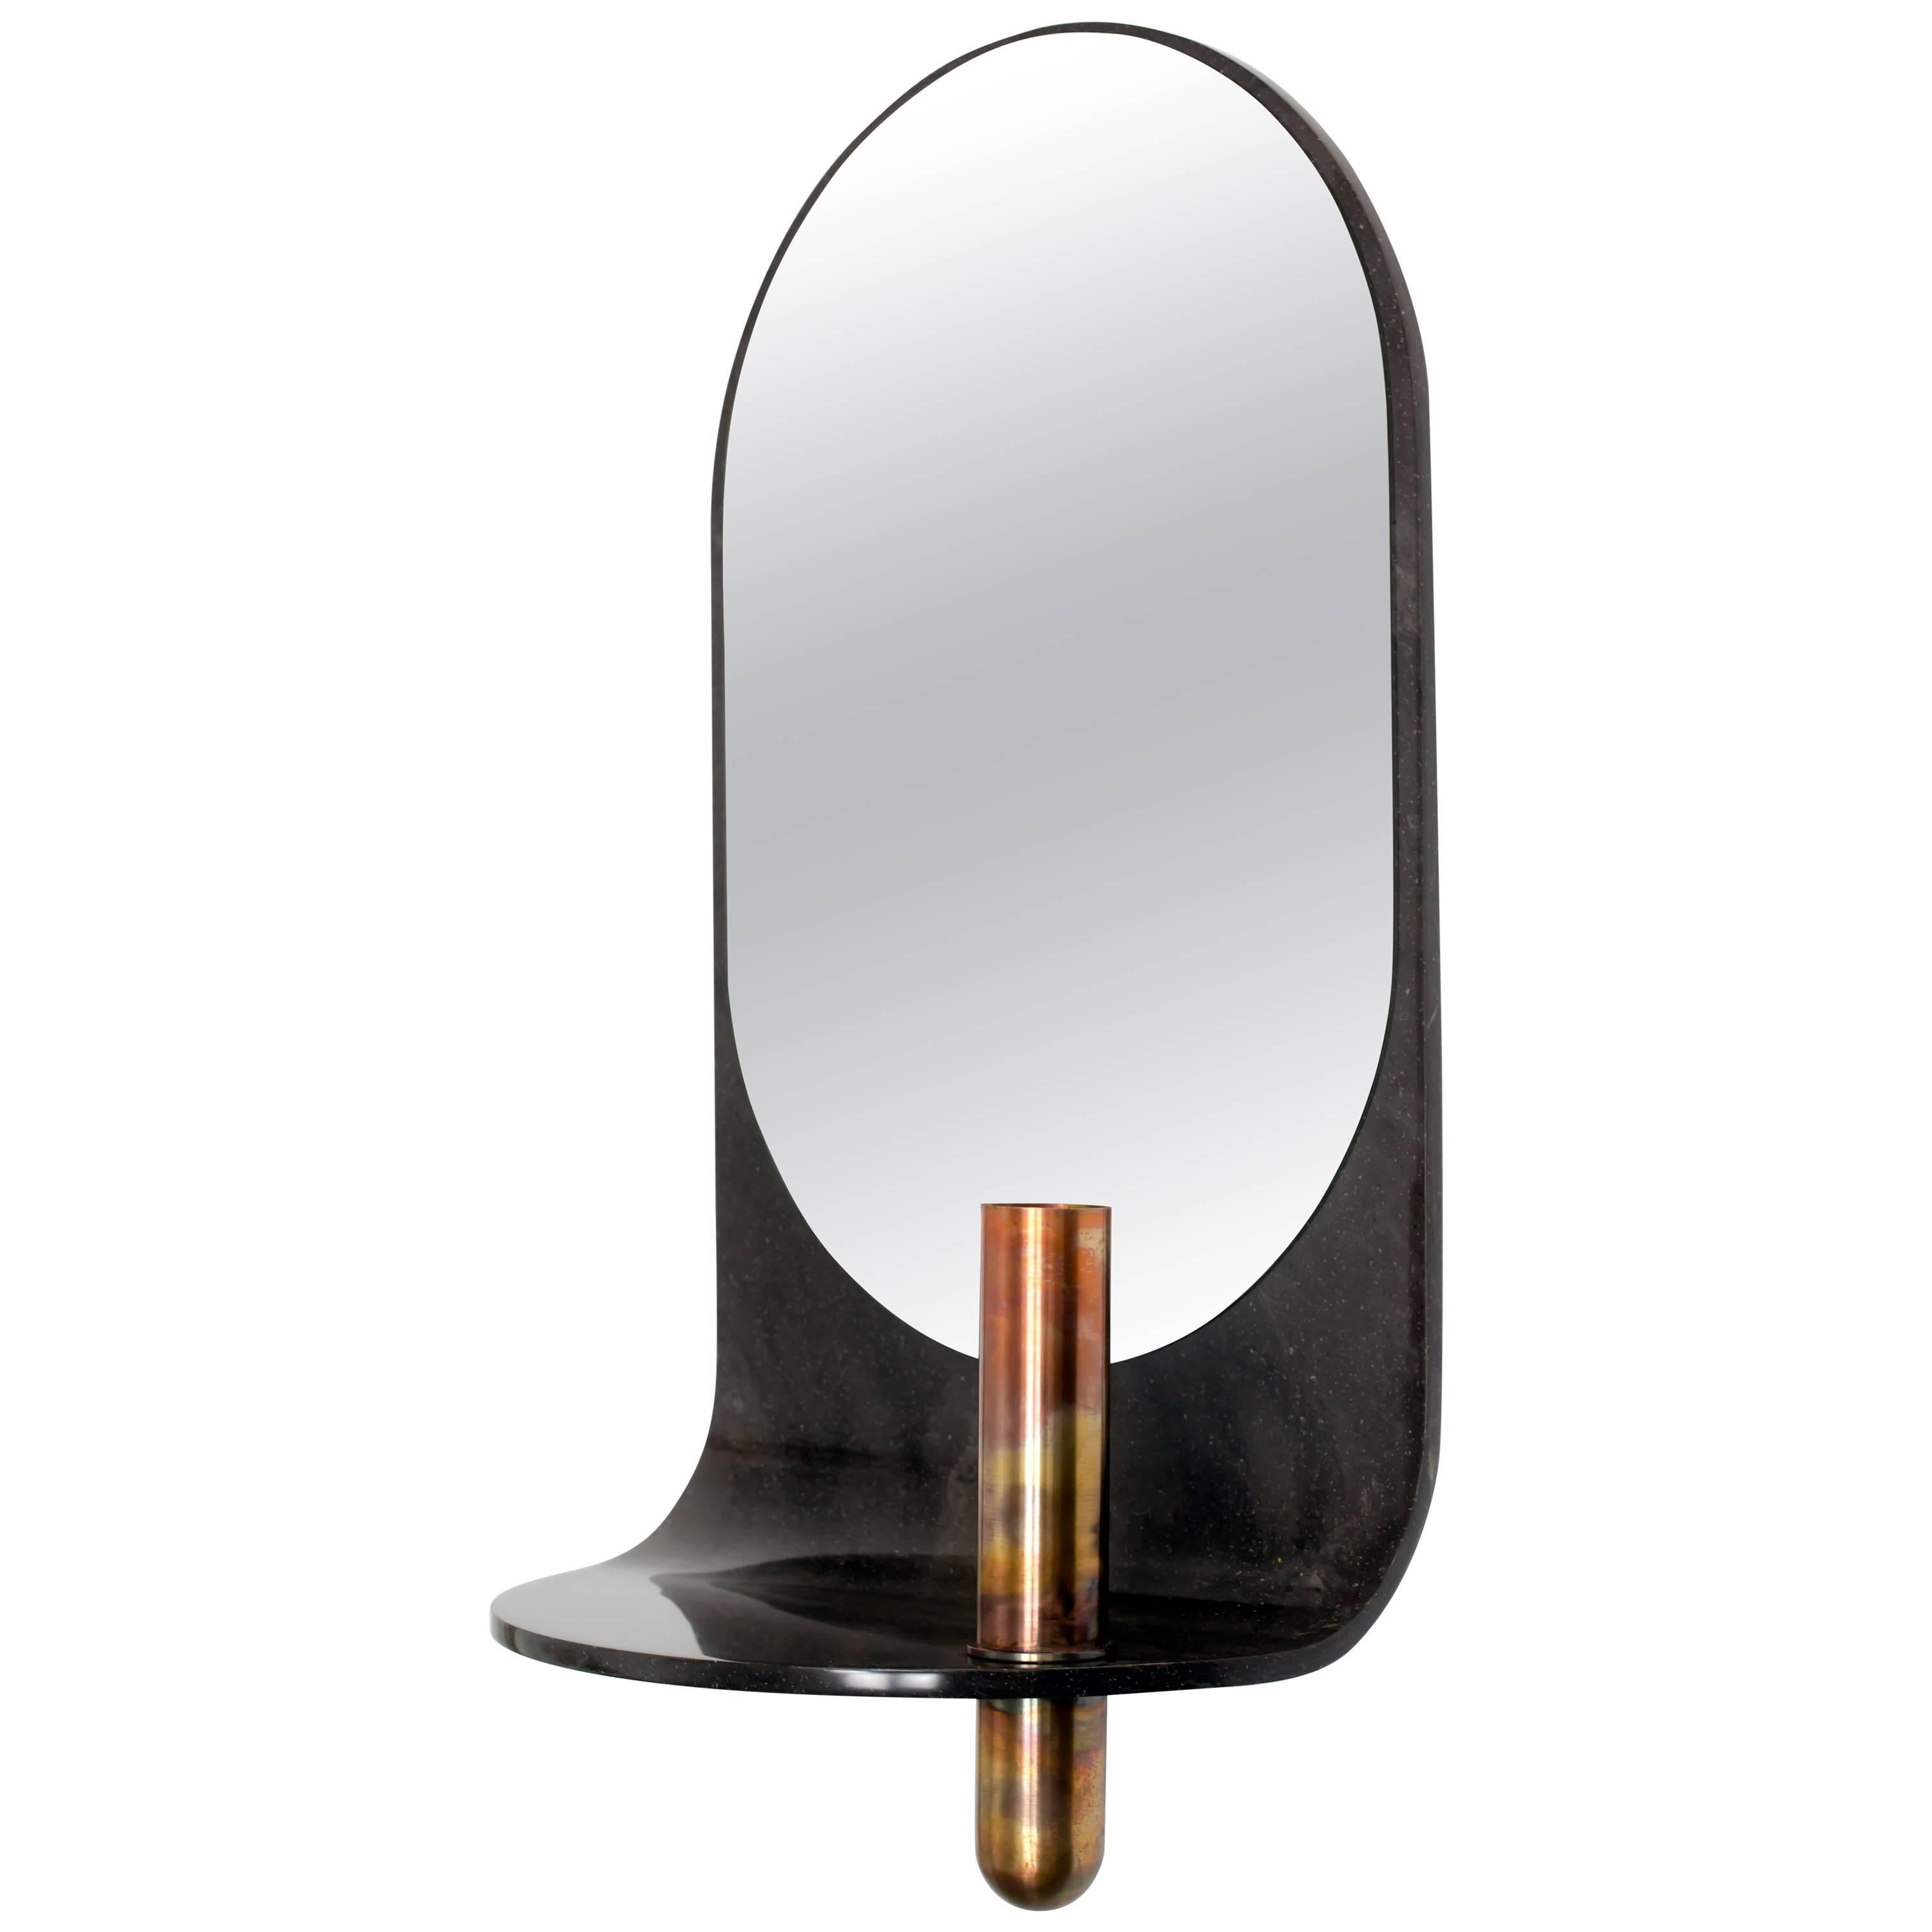 Swoop Mirror in Curved Stone with Copper Vase by Birnam Wood Studio 4